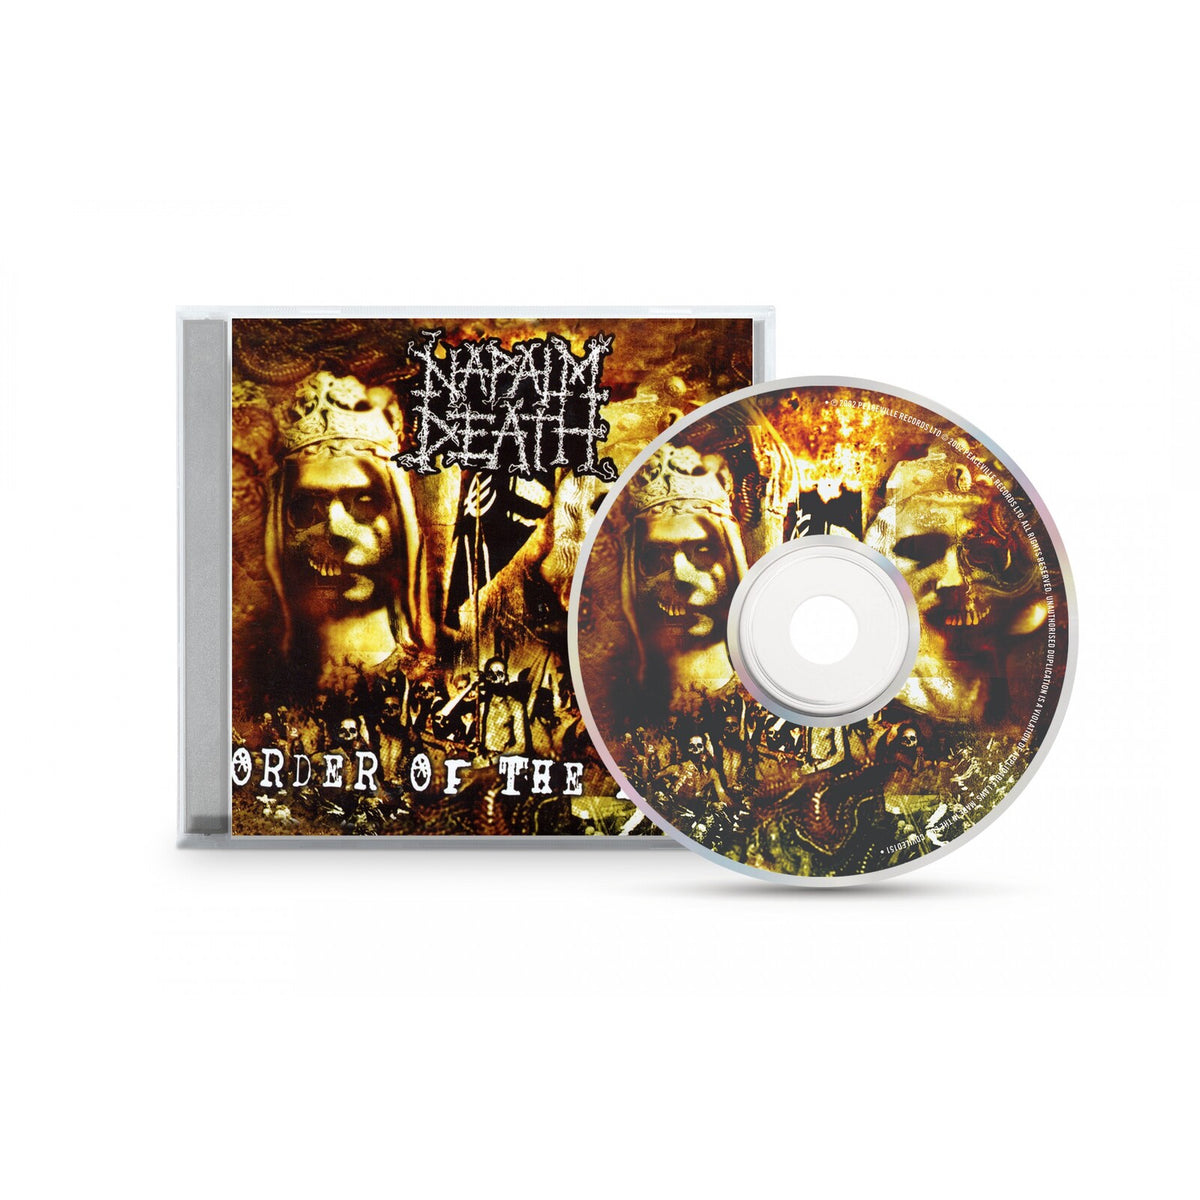 Napalm Death - Order Of The Leech - CDVILED1180